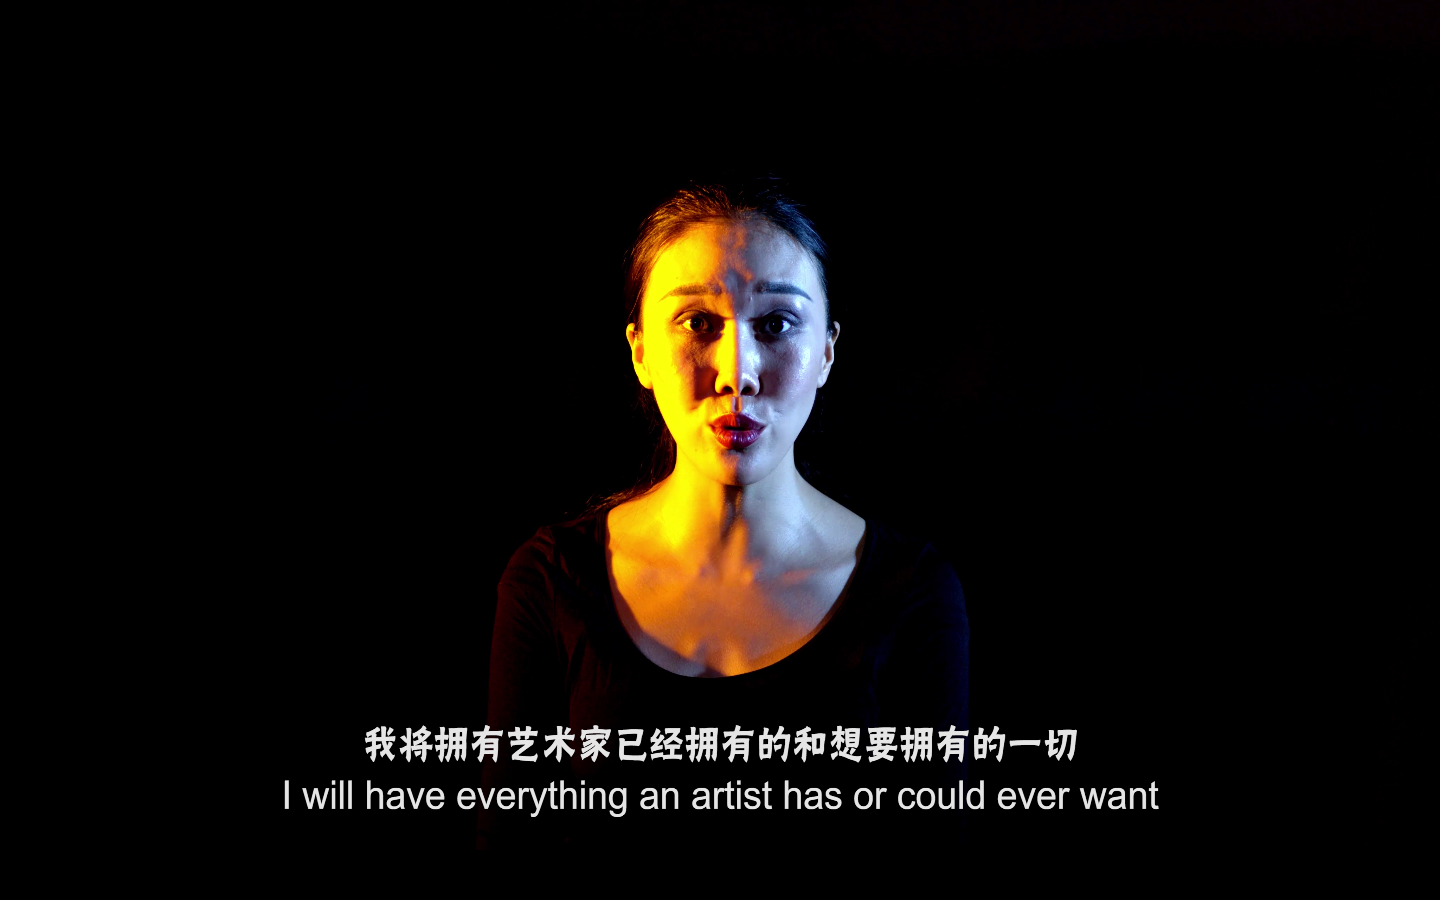 An image of a woman against a black background. The text reads 'I will have everything an artist has or could ever want'.